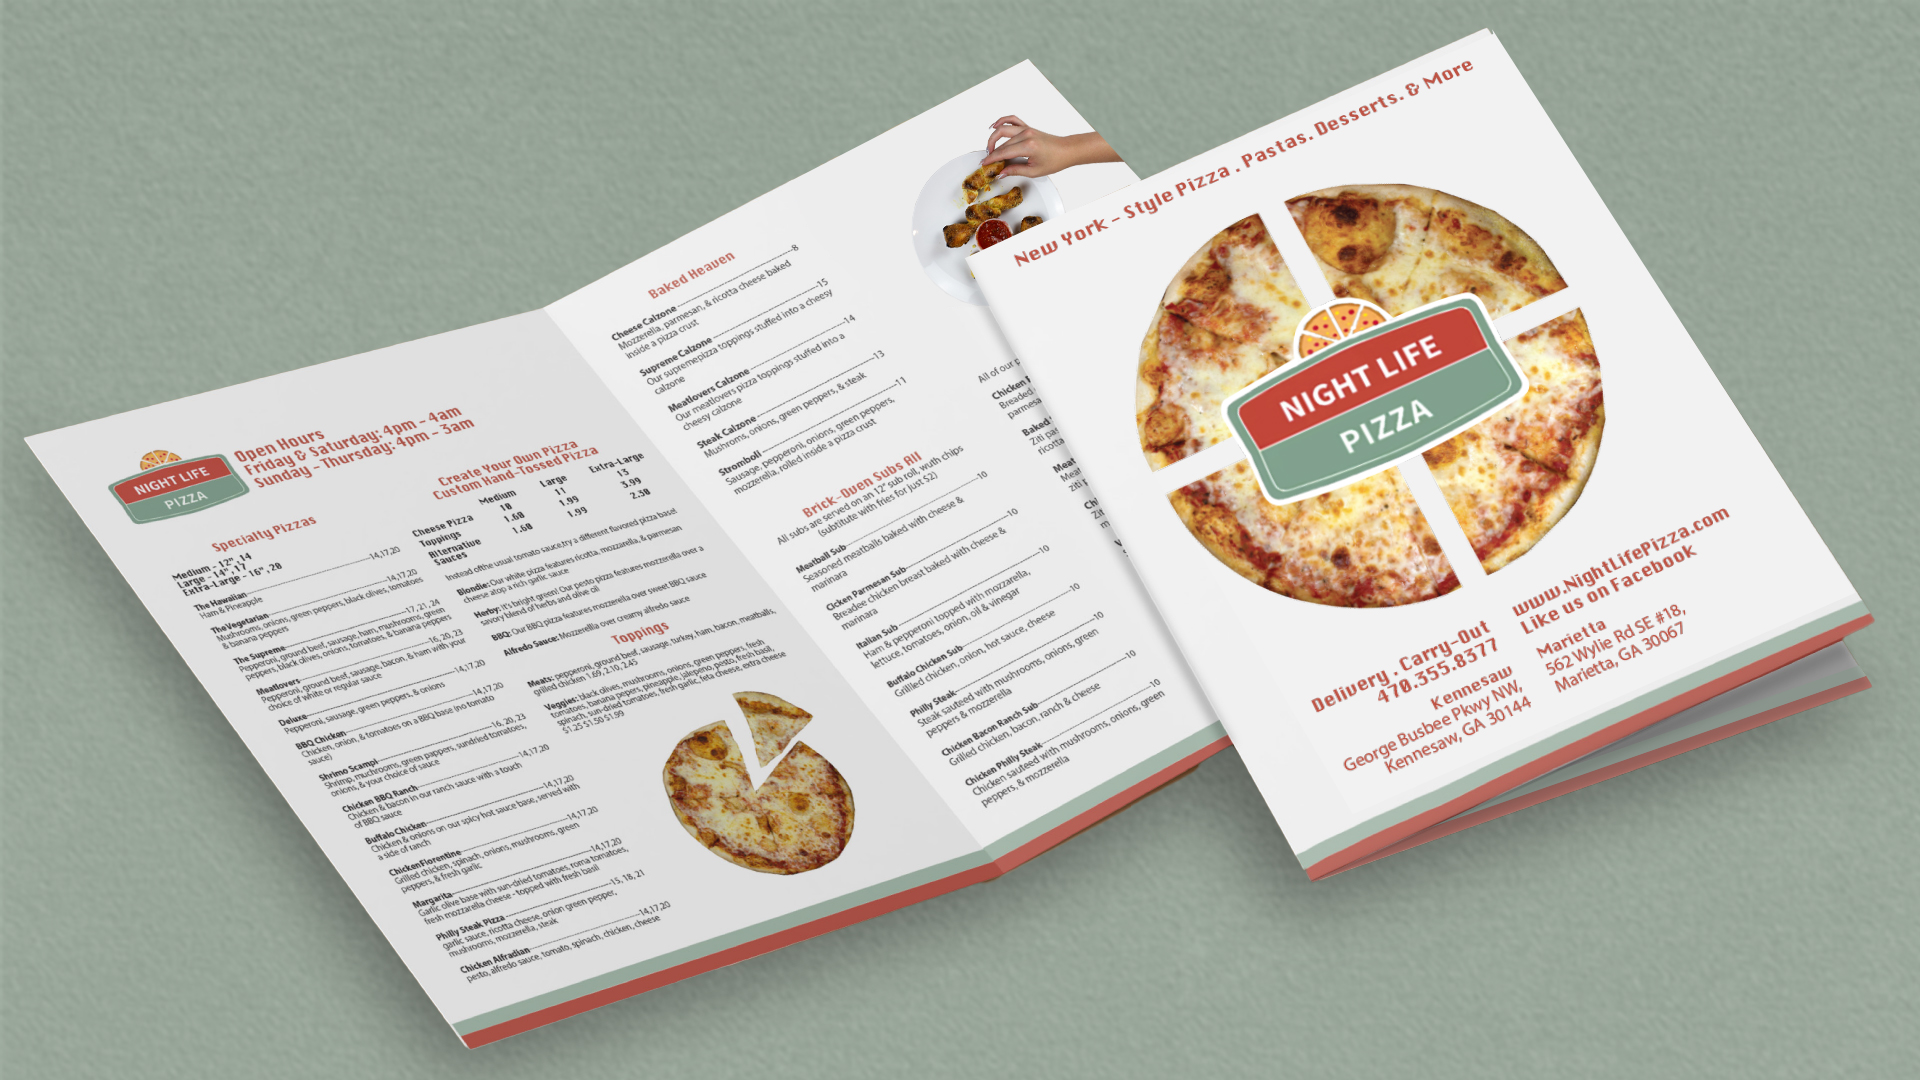 “Night Life Pizza" / “Night Life Pizza”, Menu Redesign, Adobe InDesign and Illustrator, 8.5 x 11 inches printed, 2022.